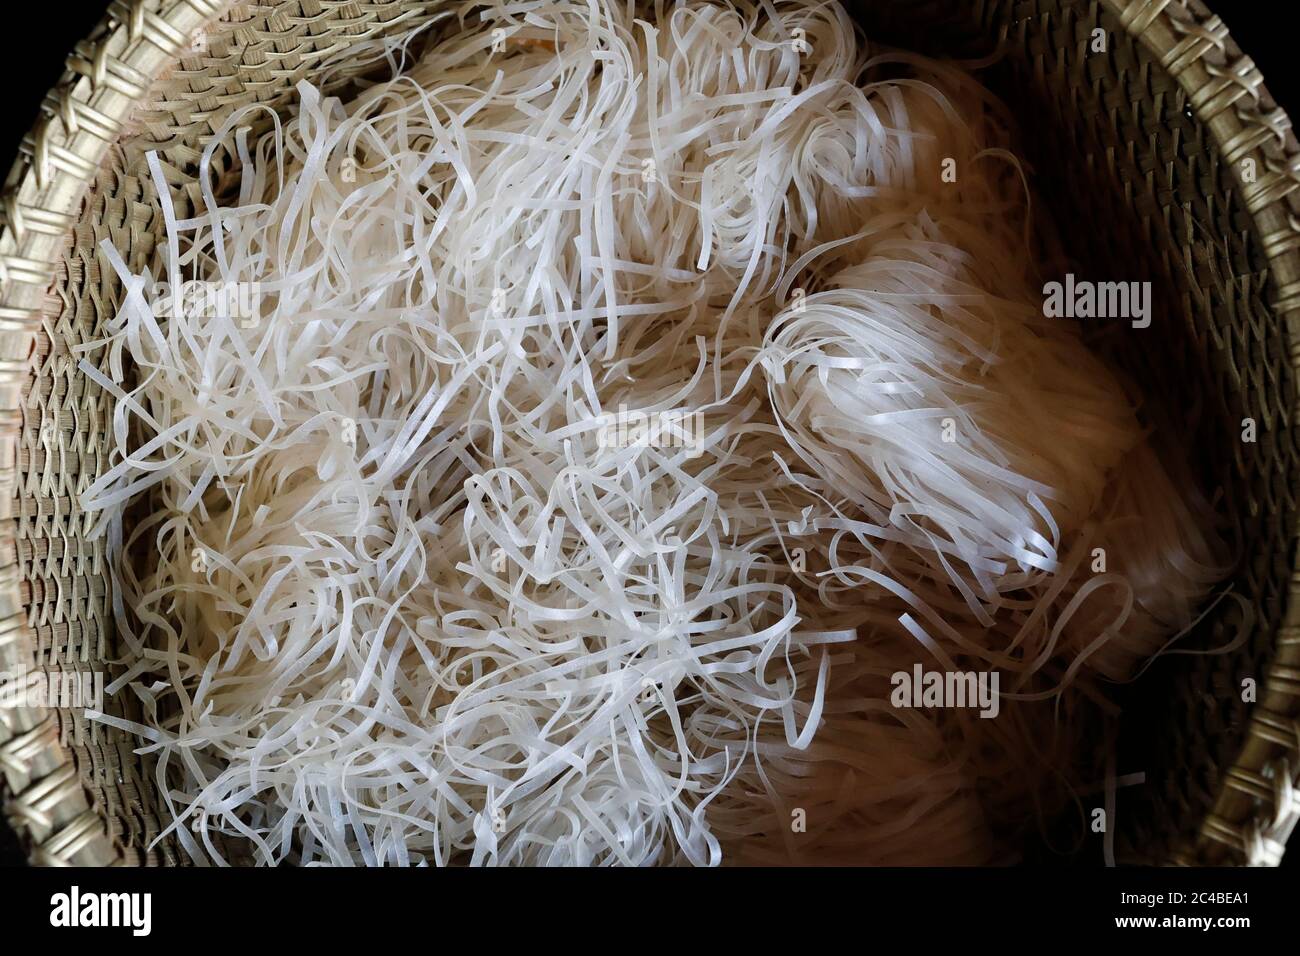 Vietnamese noodles in a basket Stock Photo